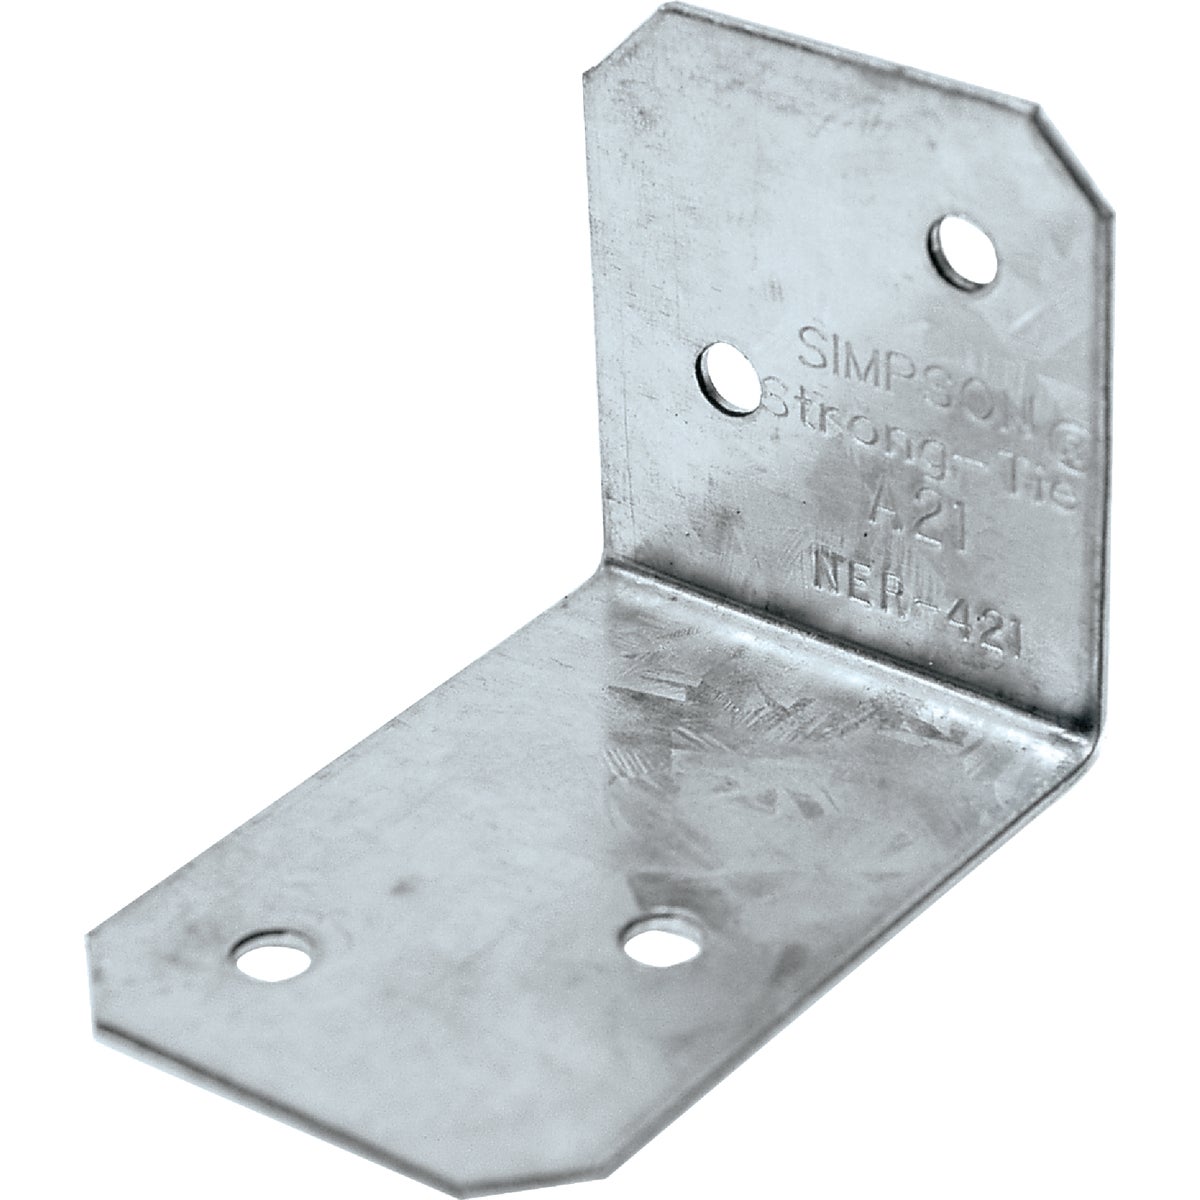 Simpson Strong-Tie A21 Simpson Strong-Tie 2 In. x 1-1/2 In. x 1-3/8 In. Galvanized Steel 18 ga Reinforcing Angle A21